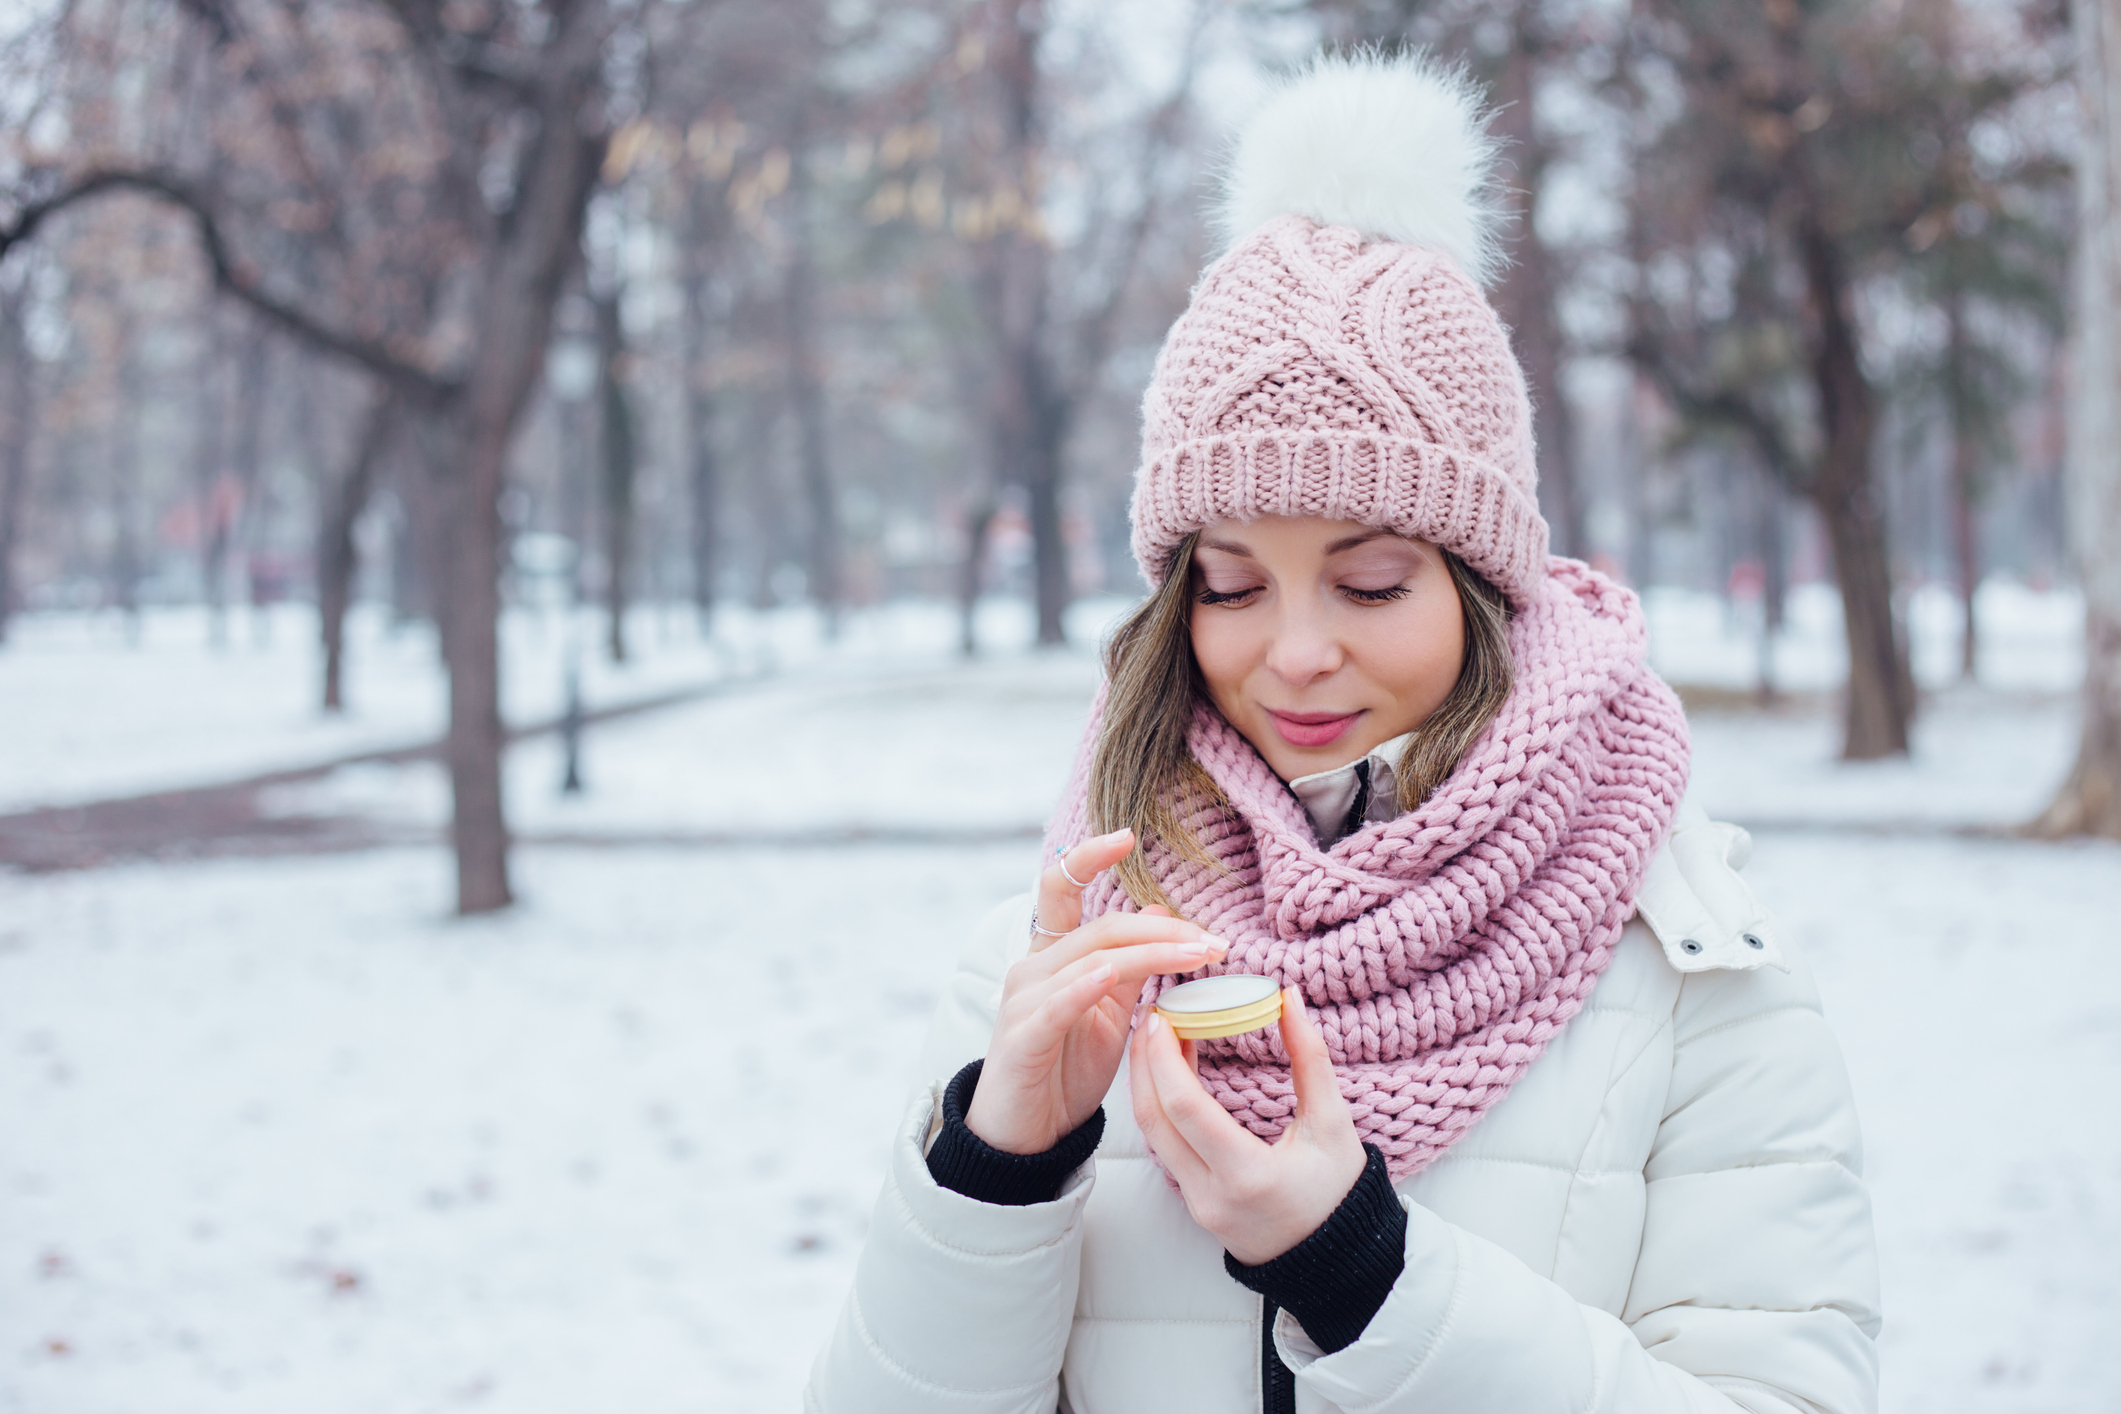 Young woman in winter clothes apply lip care balm outside cold snowy weather